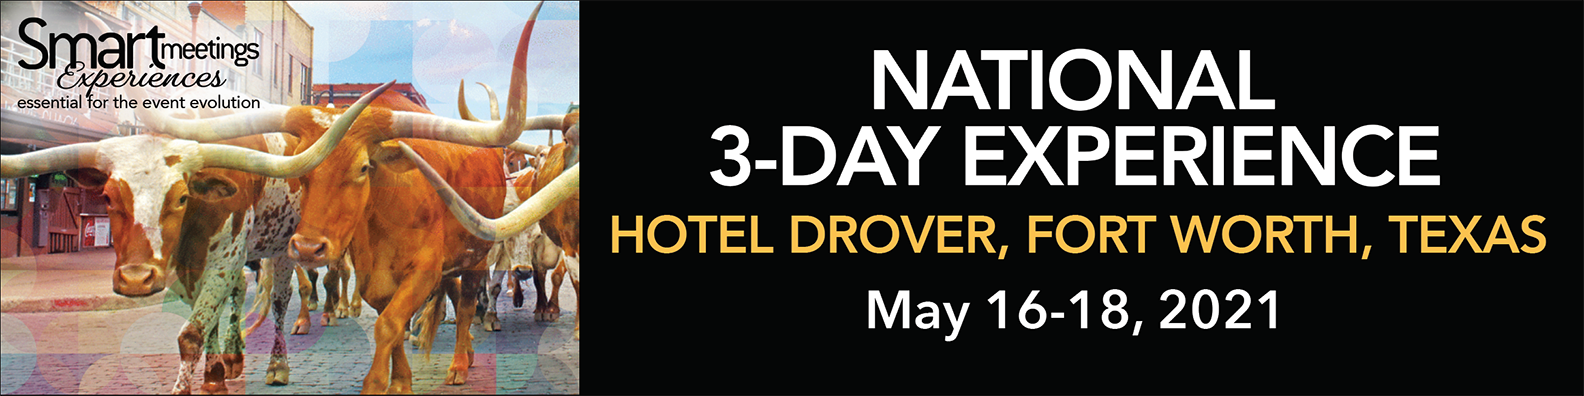 Smart Meetings National 3-Day Experience - Fort Worth, Texas